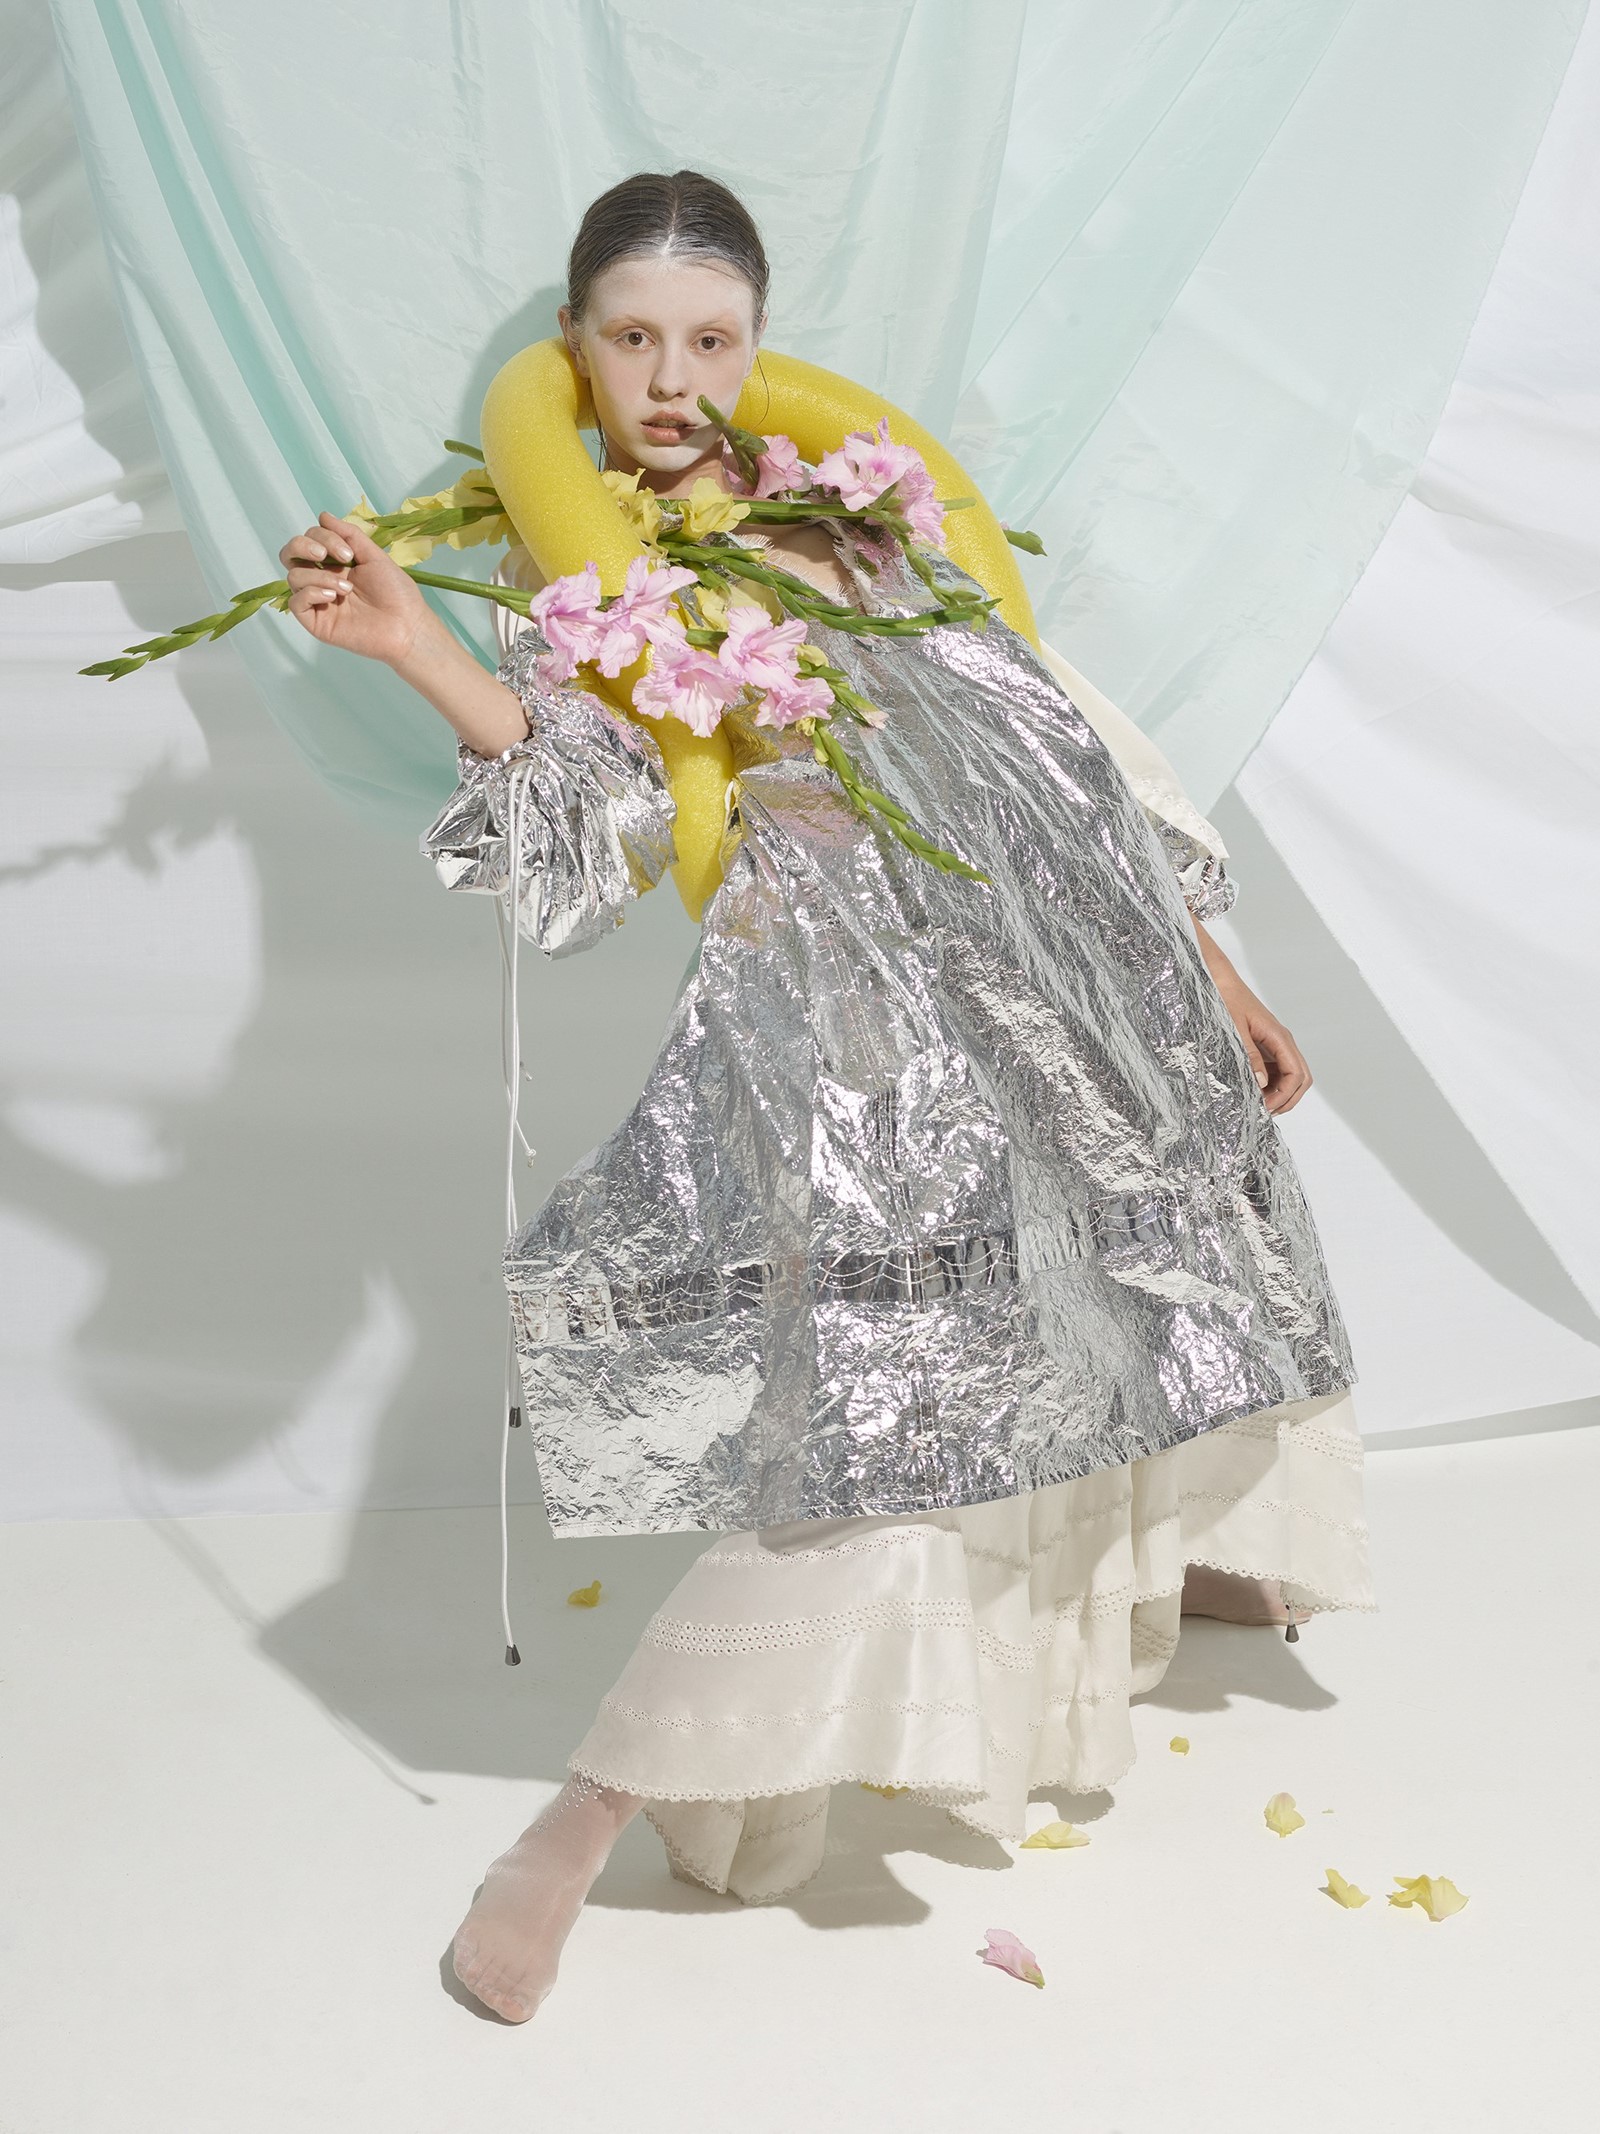 Photography by Viviane Sassen, Styling by Katie Shillingford